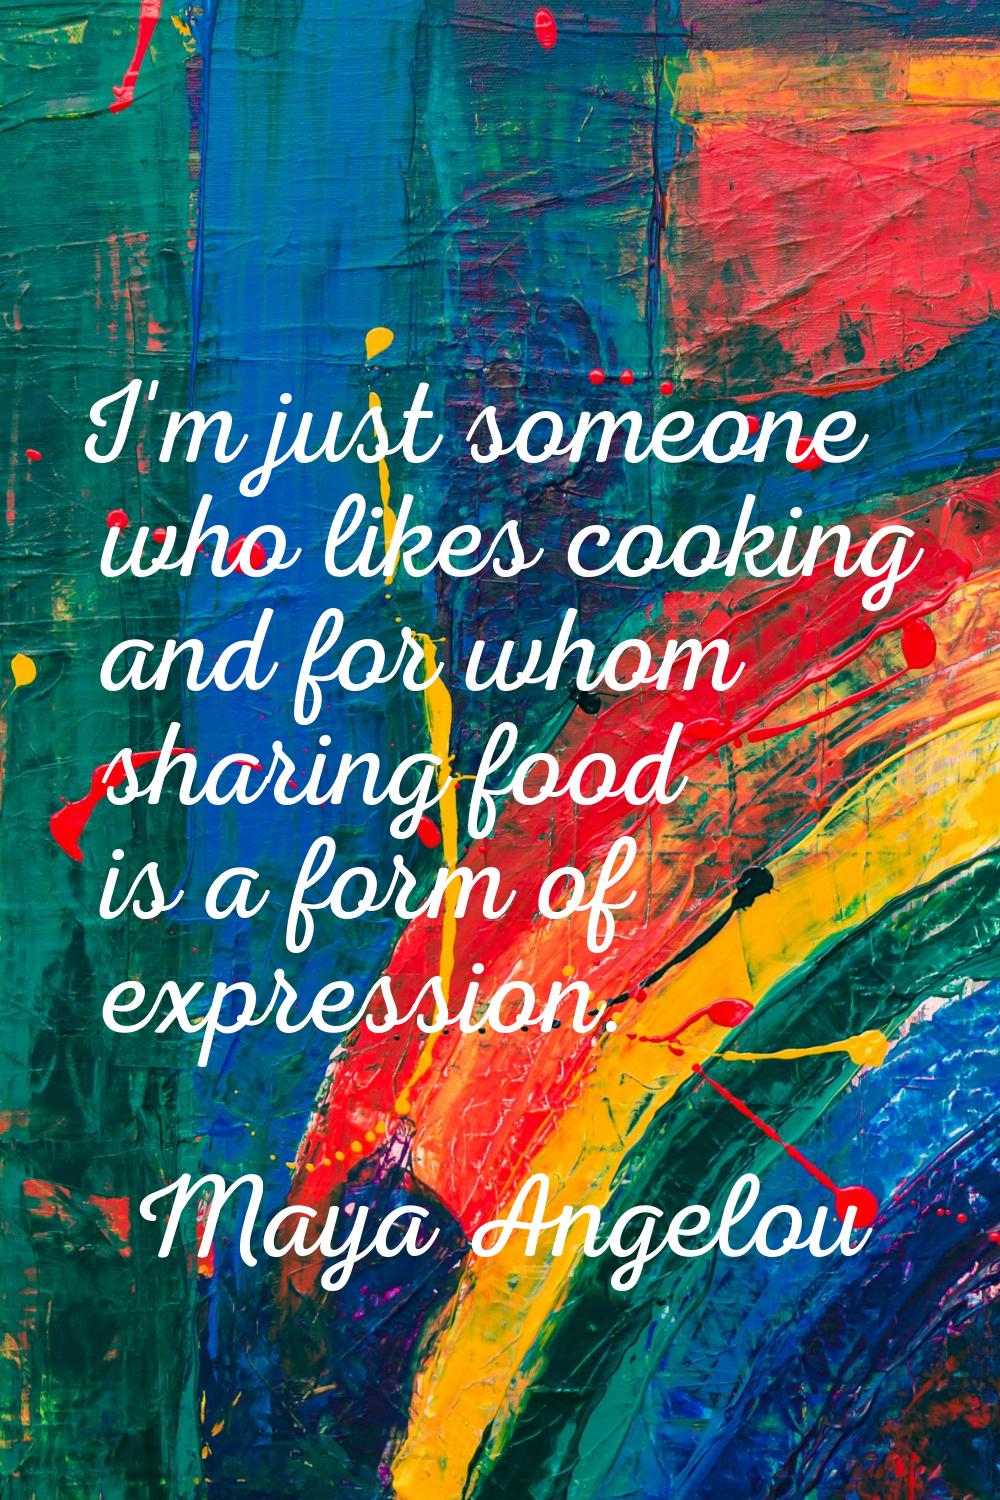 I'm just someone who likes cooking and for whom sharing food is a form of expression.